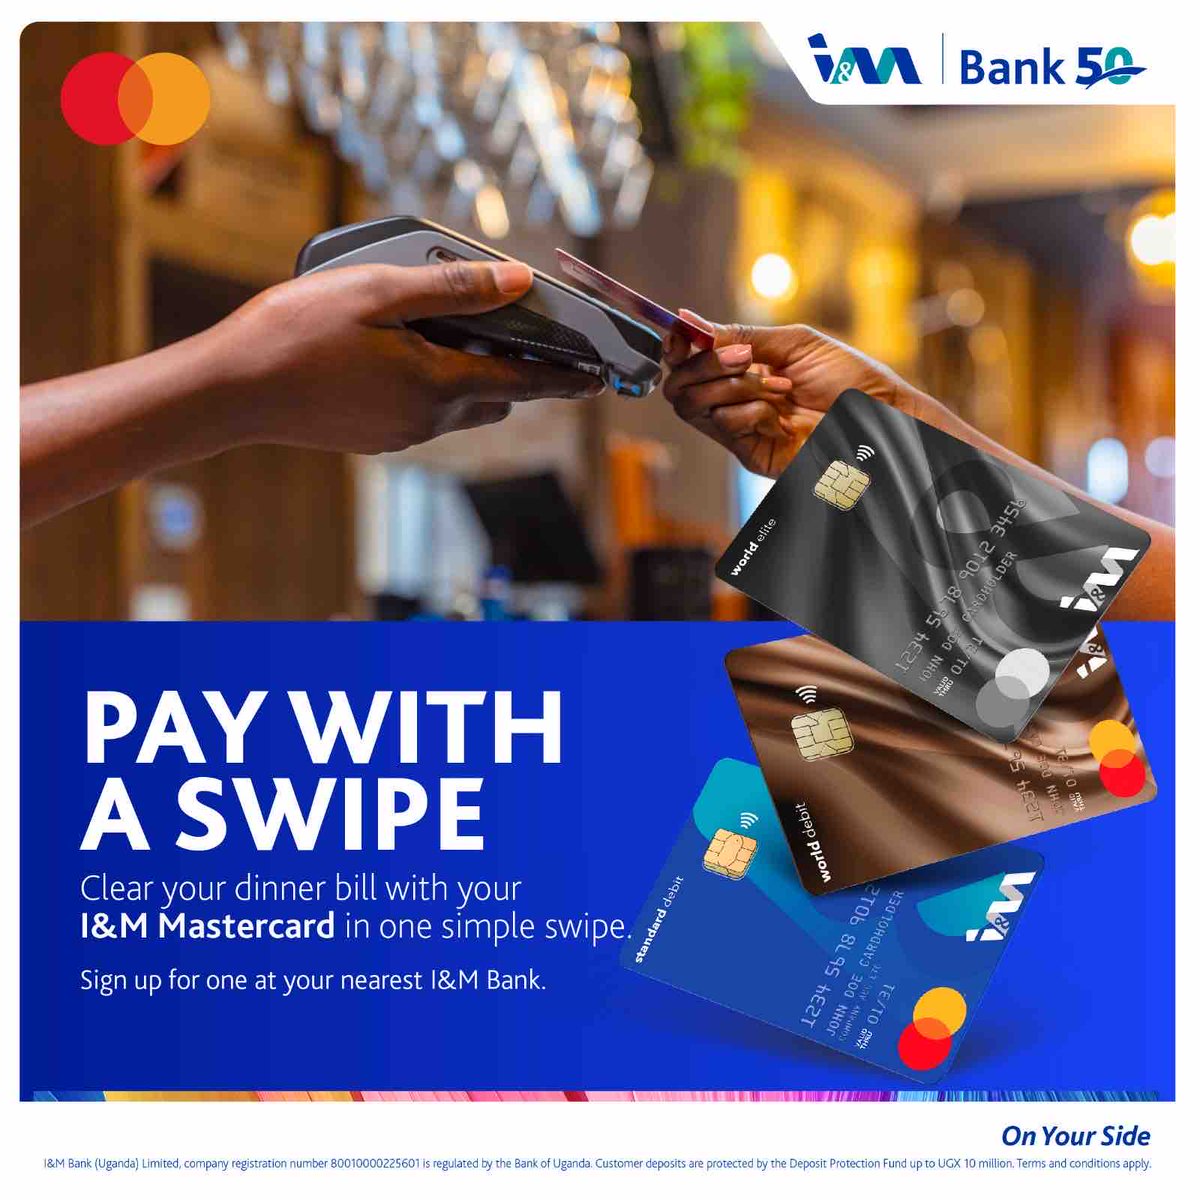 We live in a time of convenience. The I&M Bank Mastercard takes it a notch higher with easy pay through swipes.  Sign up for an I&M Mastercard at an I&M Bank near you. #OnYourSide #IMBankAt50